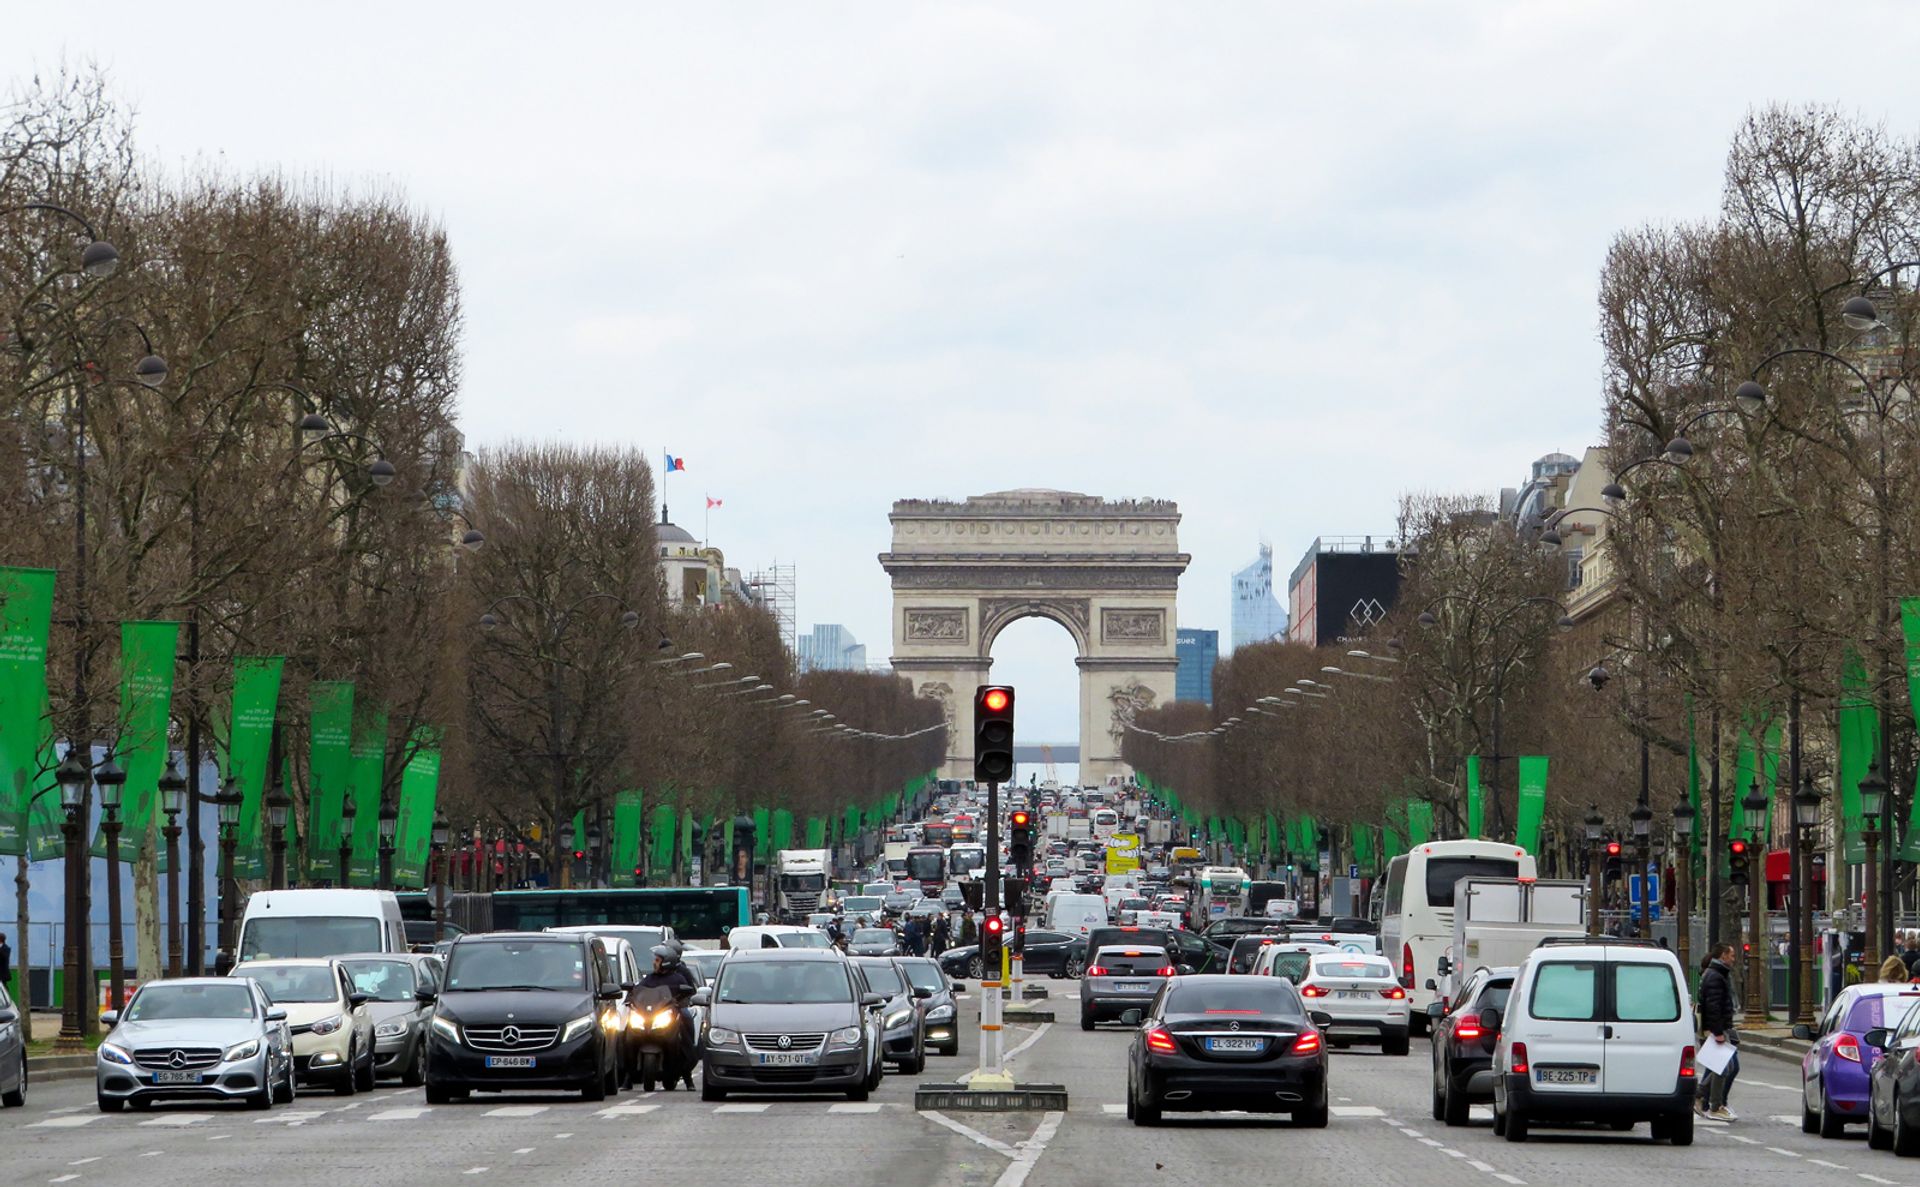 Locals avoid the Champs-Élysées because it is so polluted © Mark Lawson